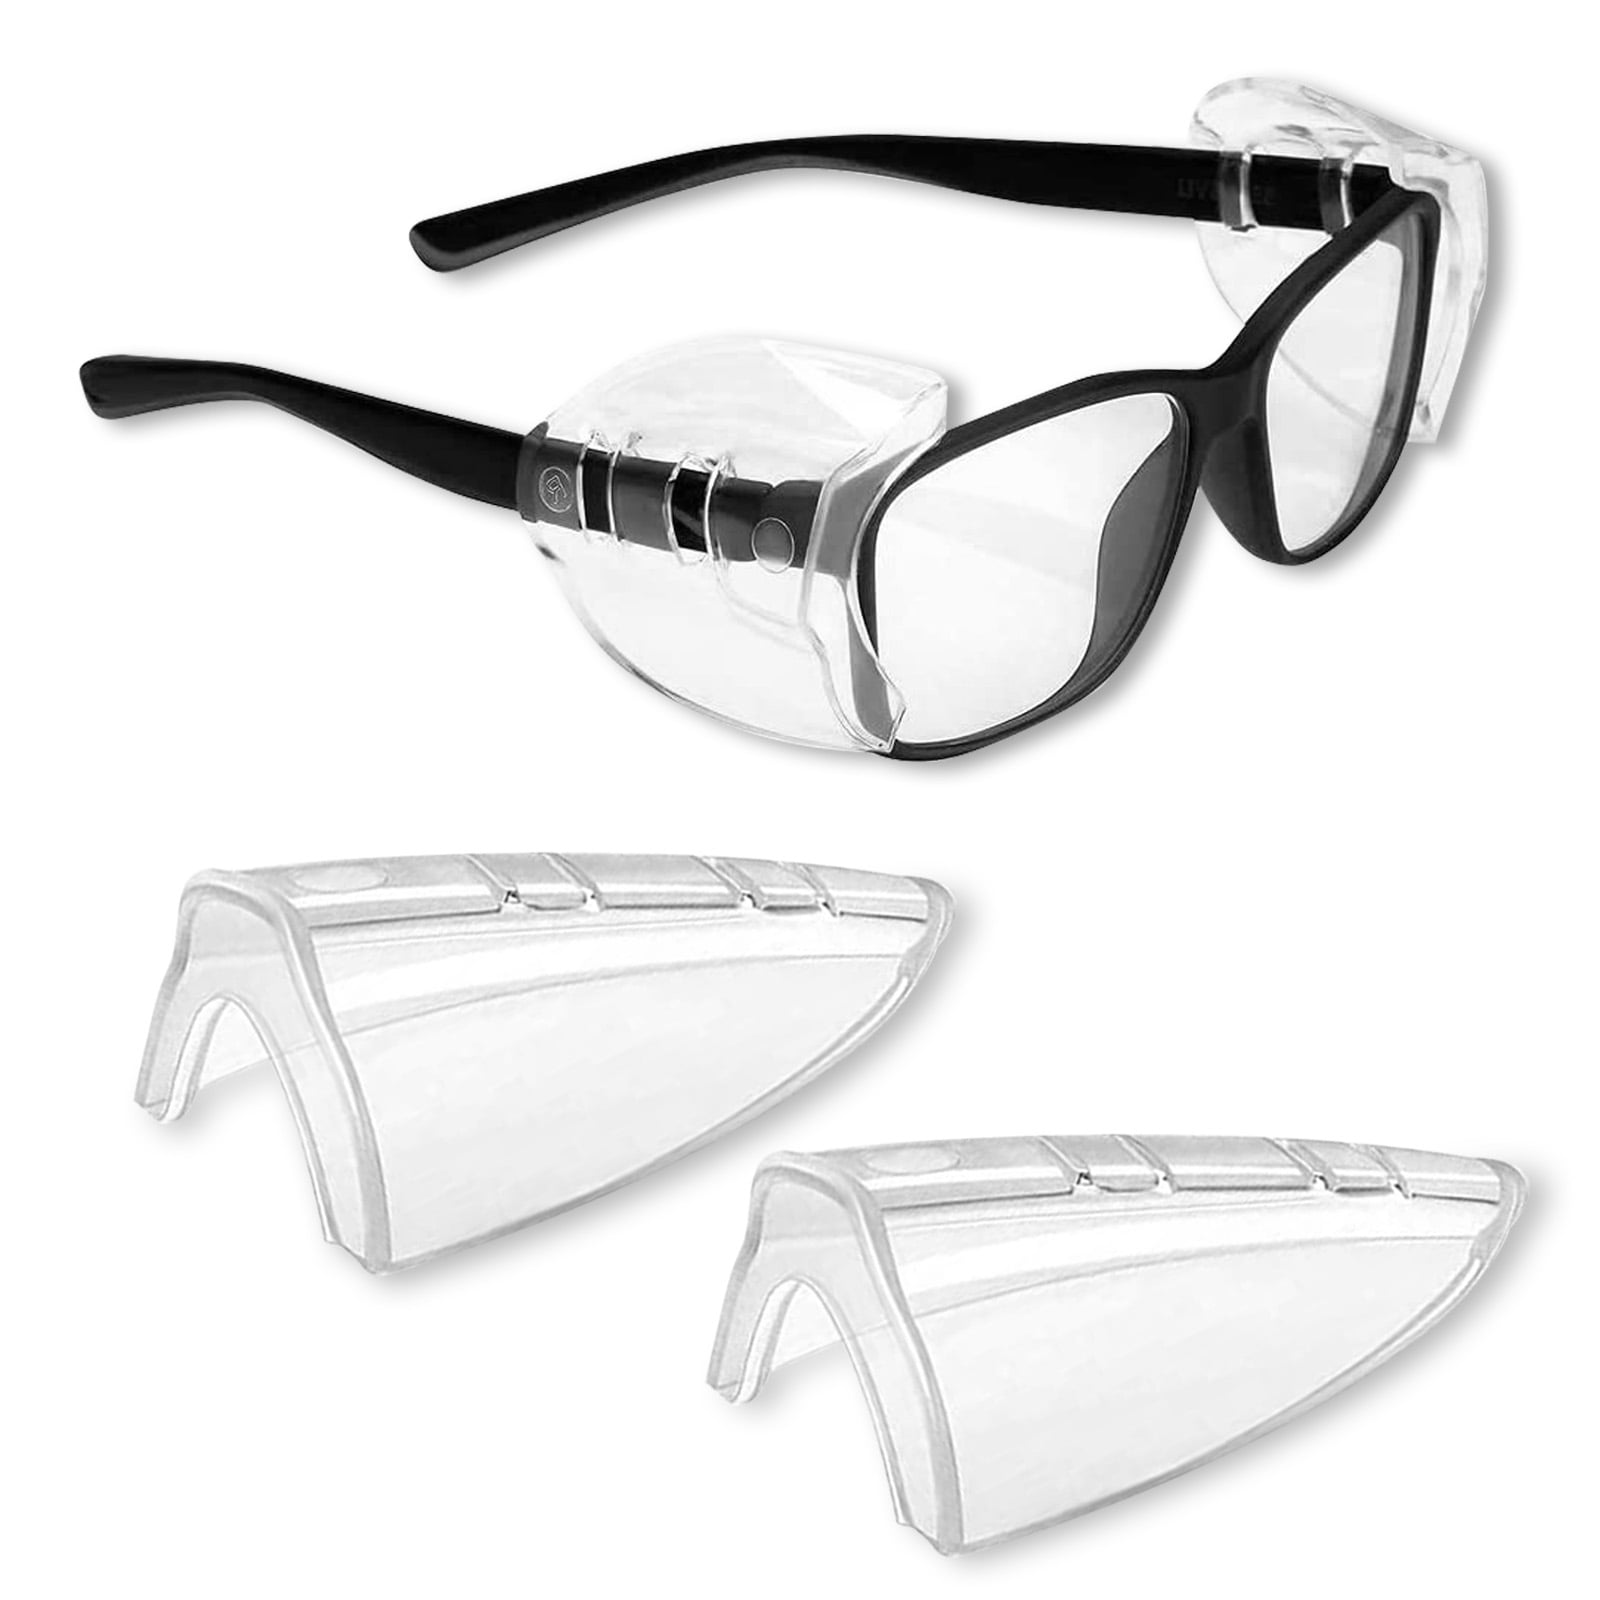 EEEkit 1pair Slip On Clear Side Shields for Safety Glasses, Eye